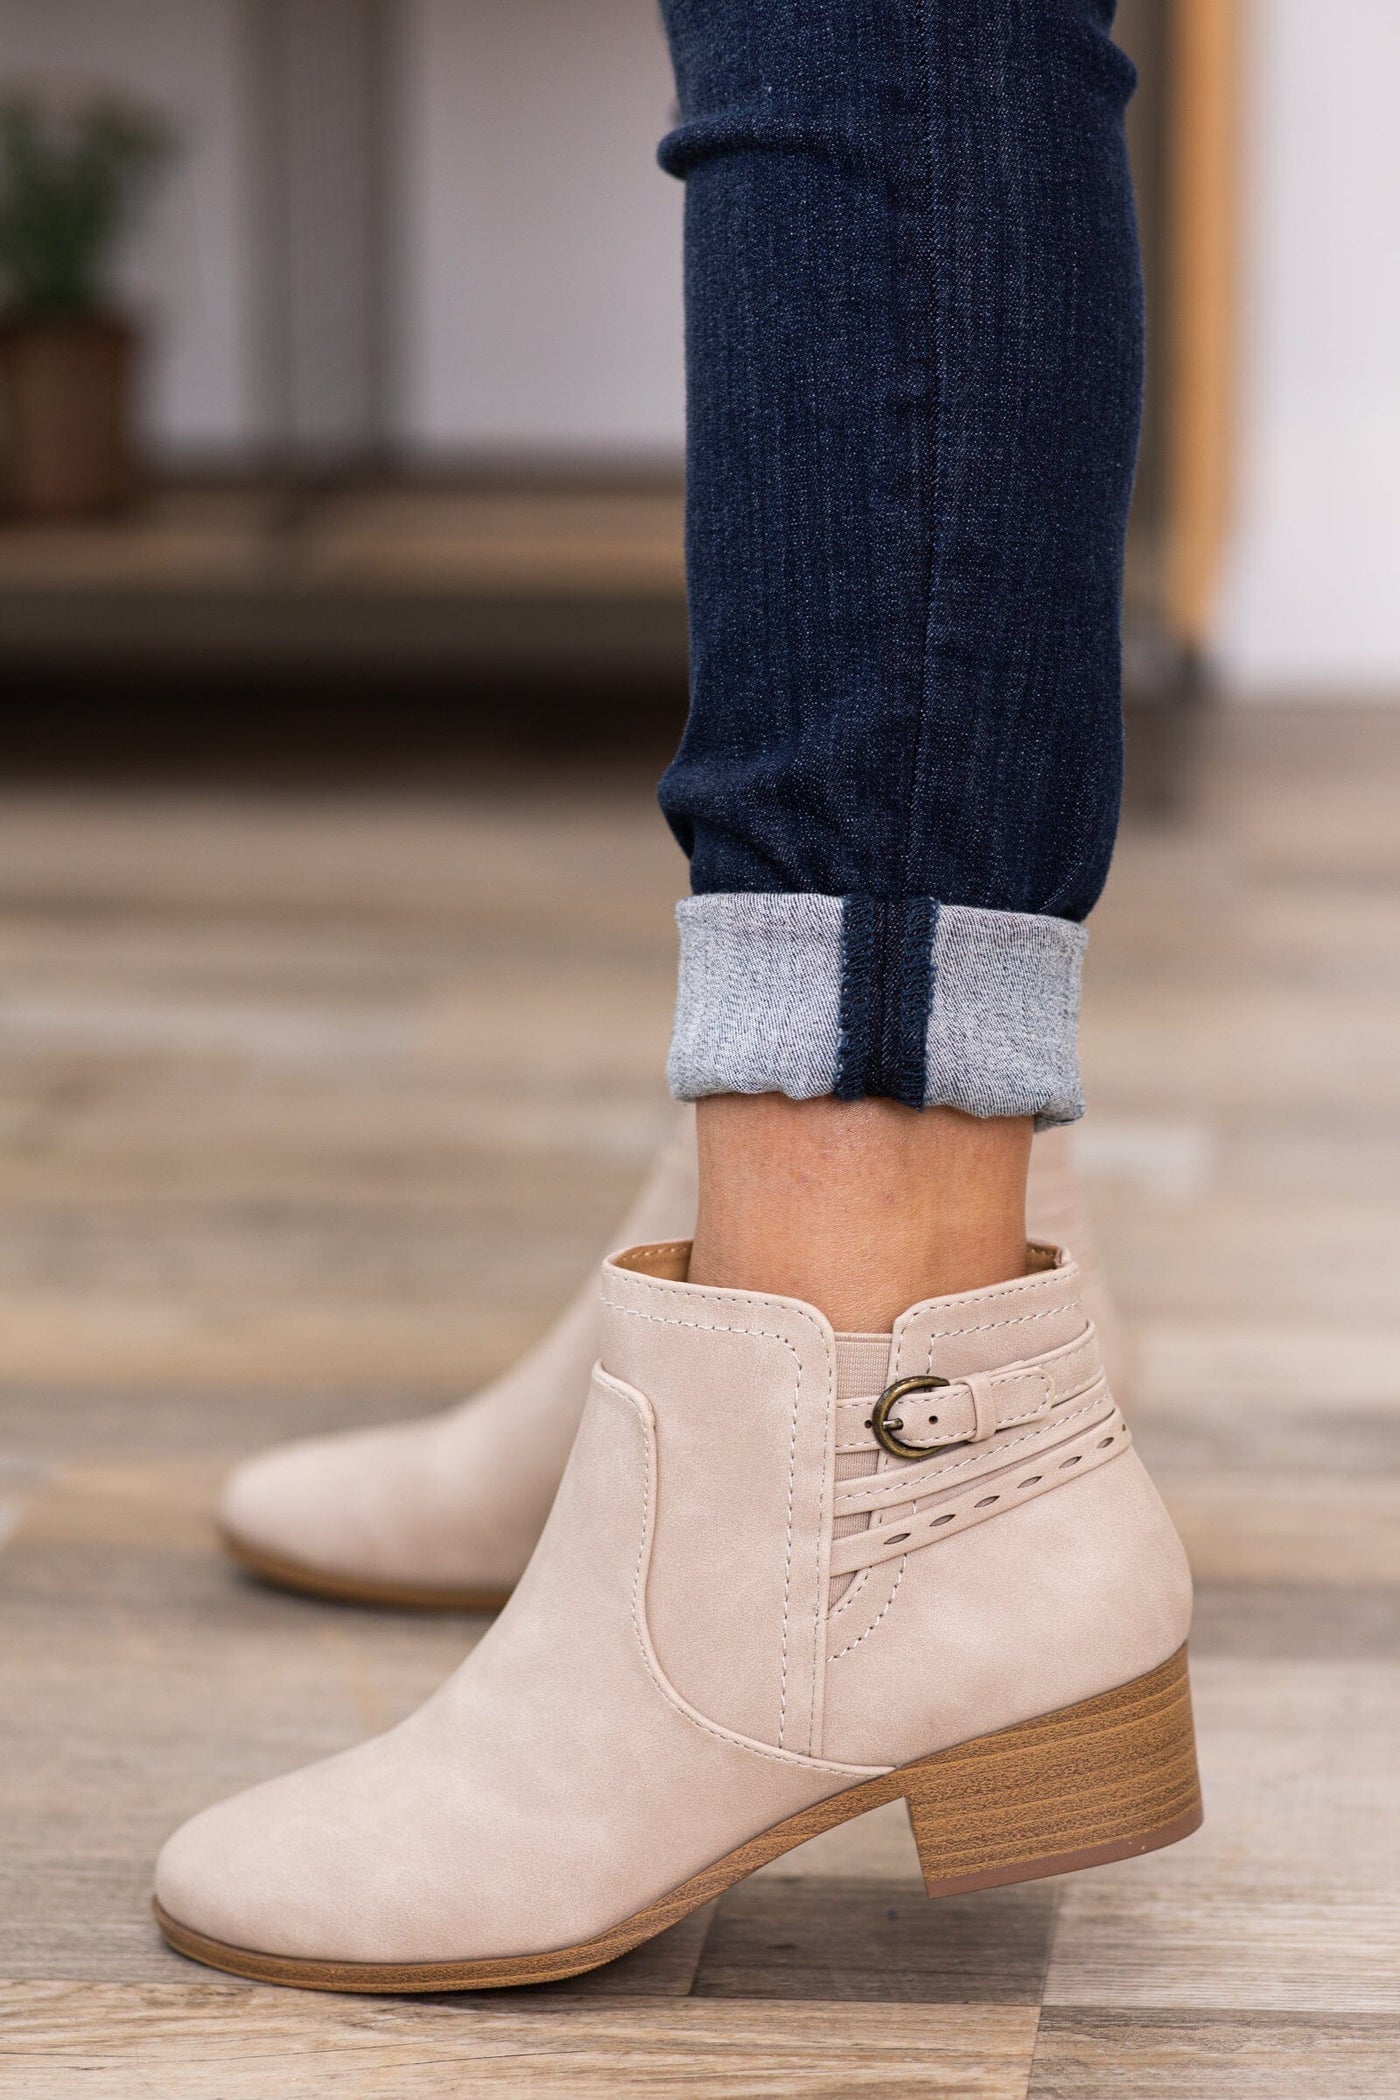 Beige Ankle Booties With Wrap Detail - Filly Flair